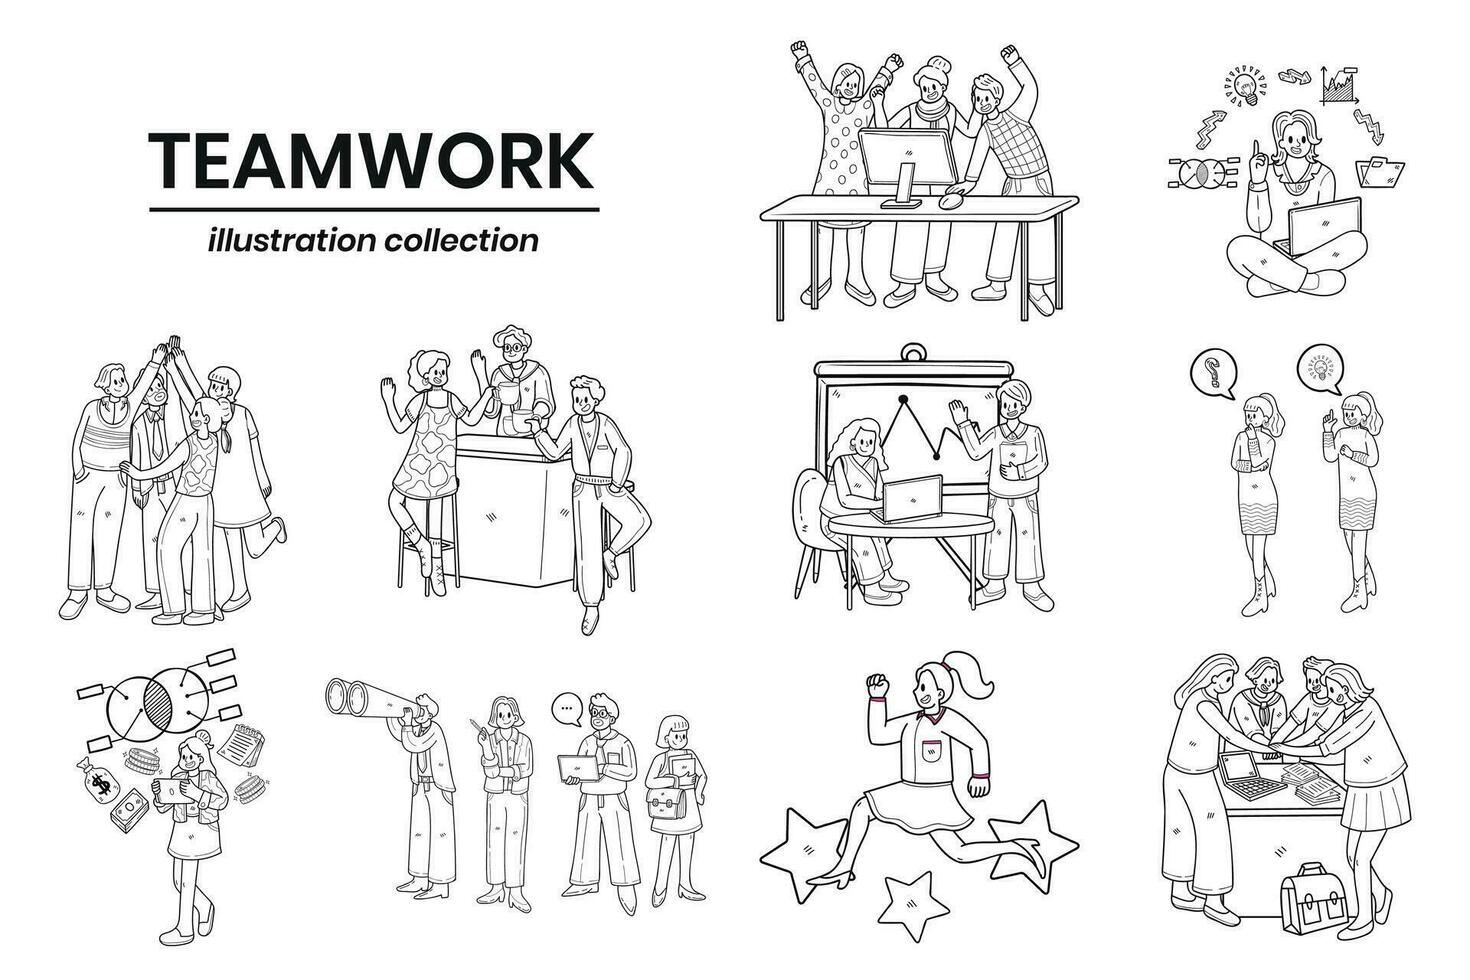 Hand Drawn Business people and teamwork in the workplace in flat style illustration for business ideas vector